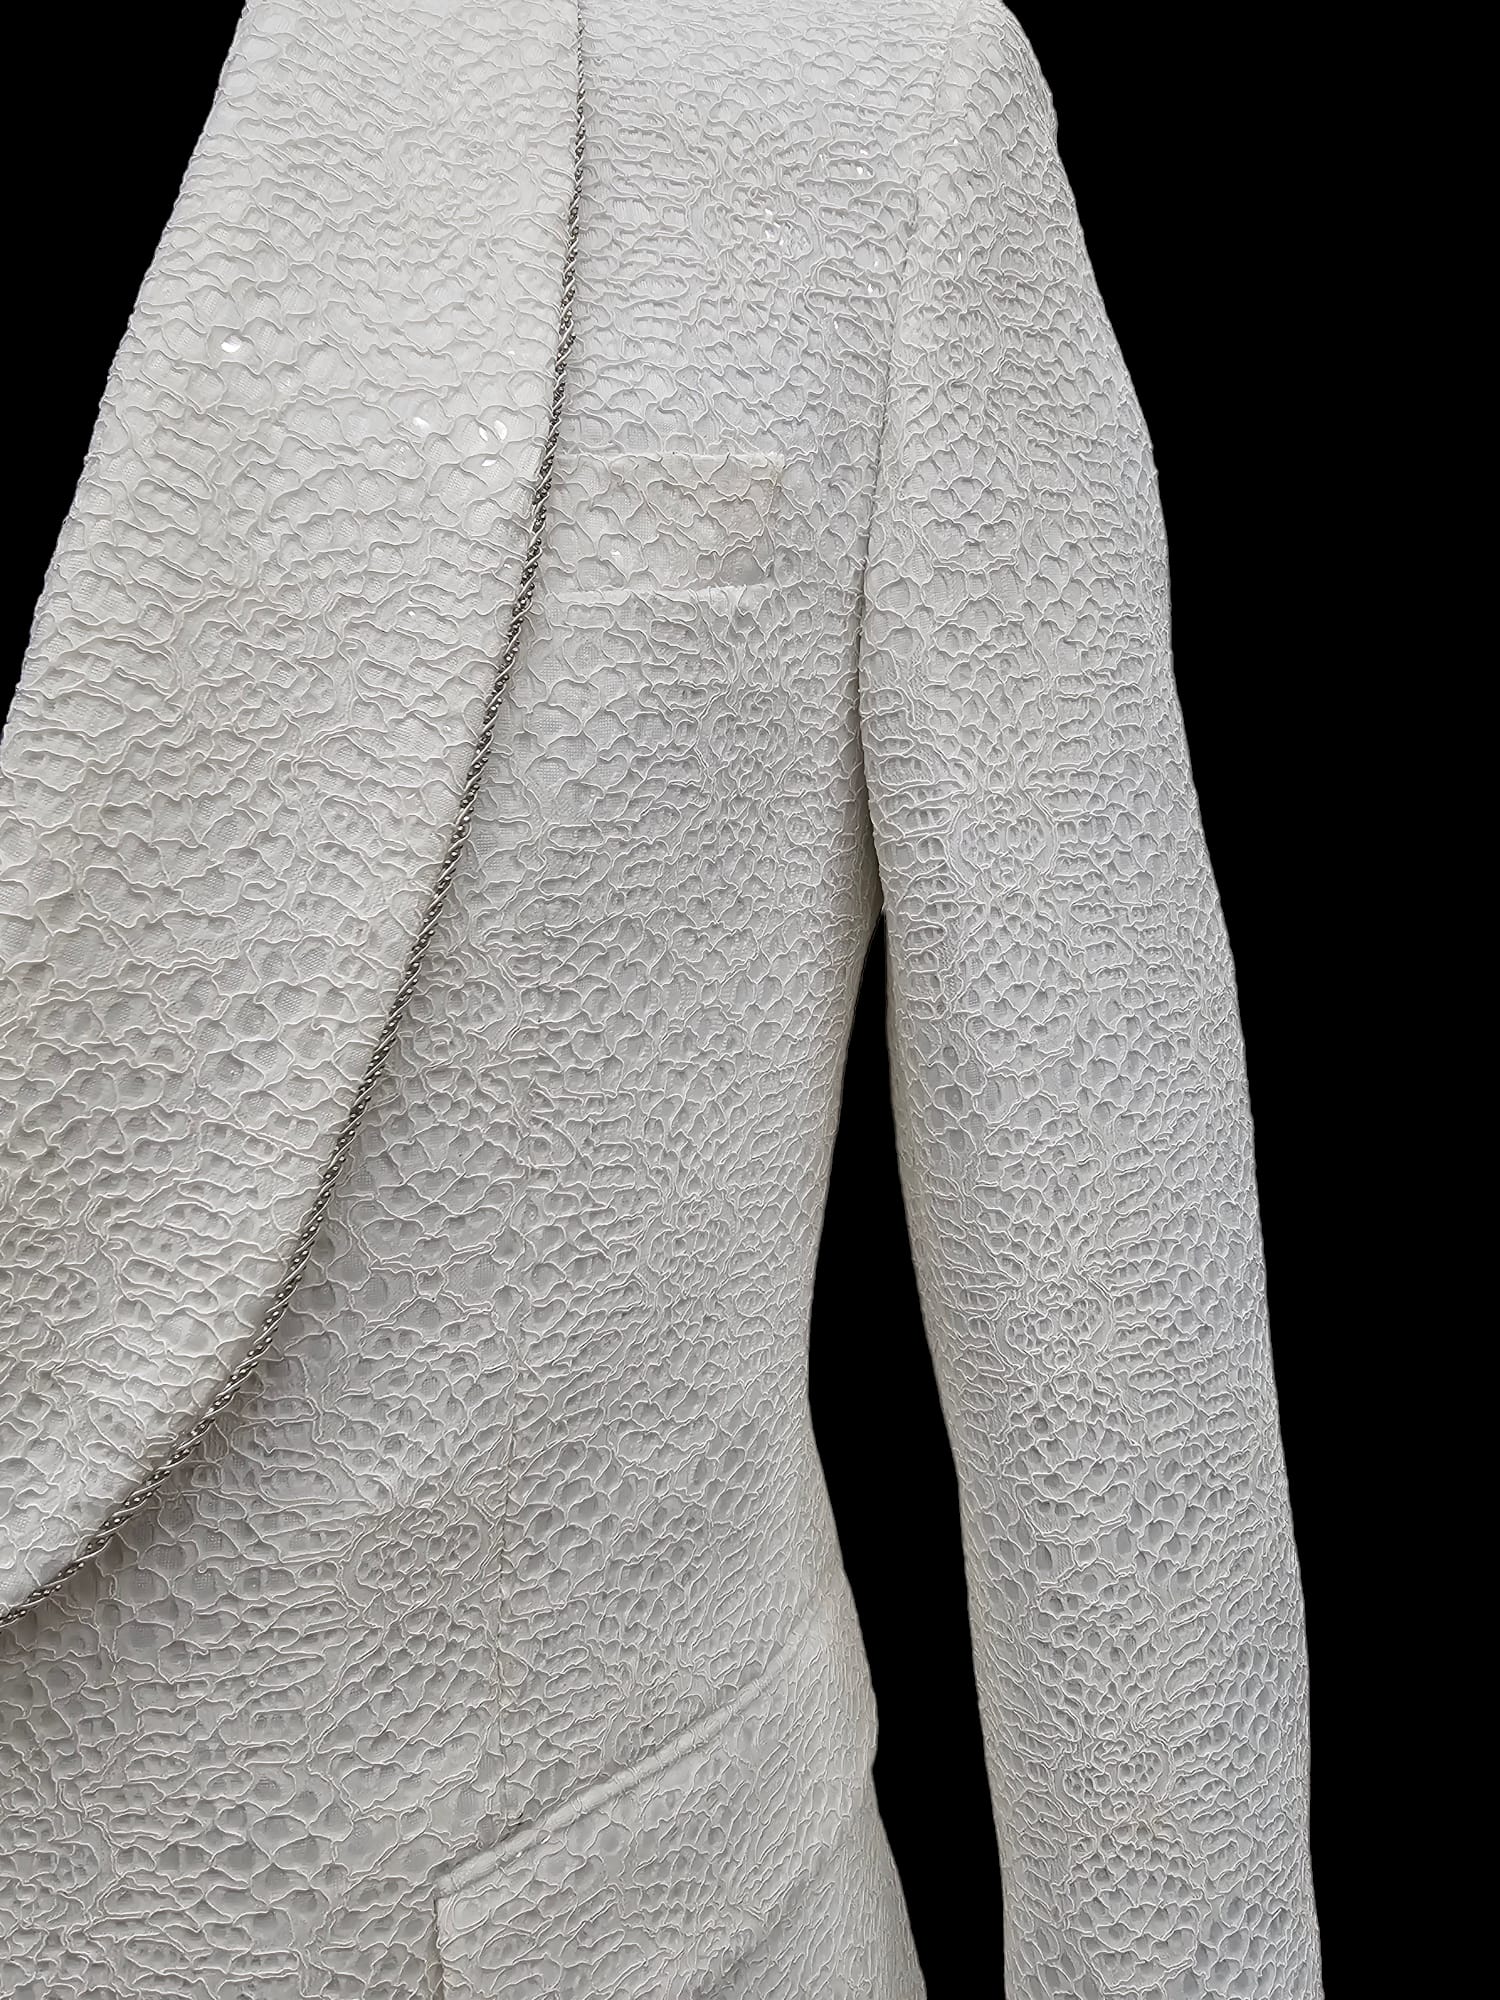 KCT Menswear's white textured tuxedo suit with an intricate pattern, perfect for high-class events.